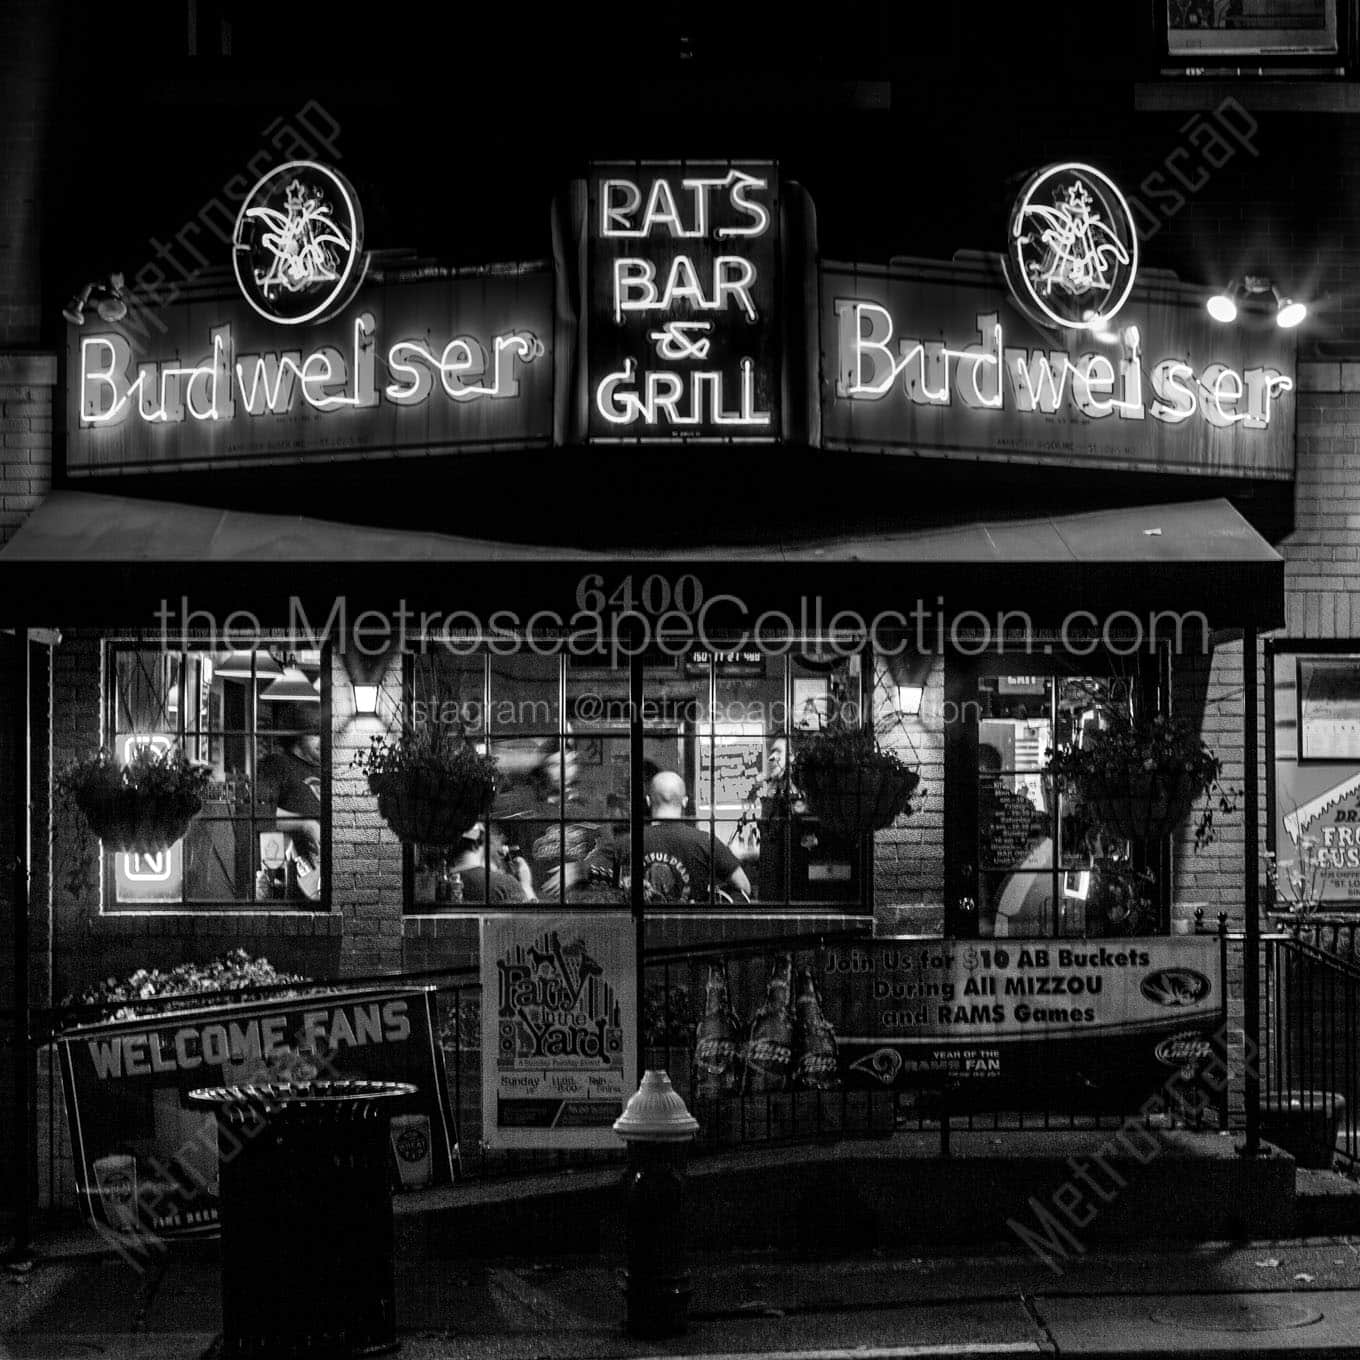 pats bar grill oakland ave Black & White Office Art